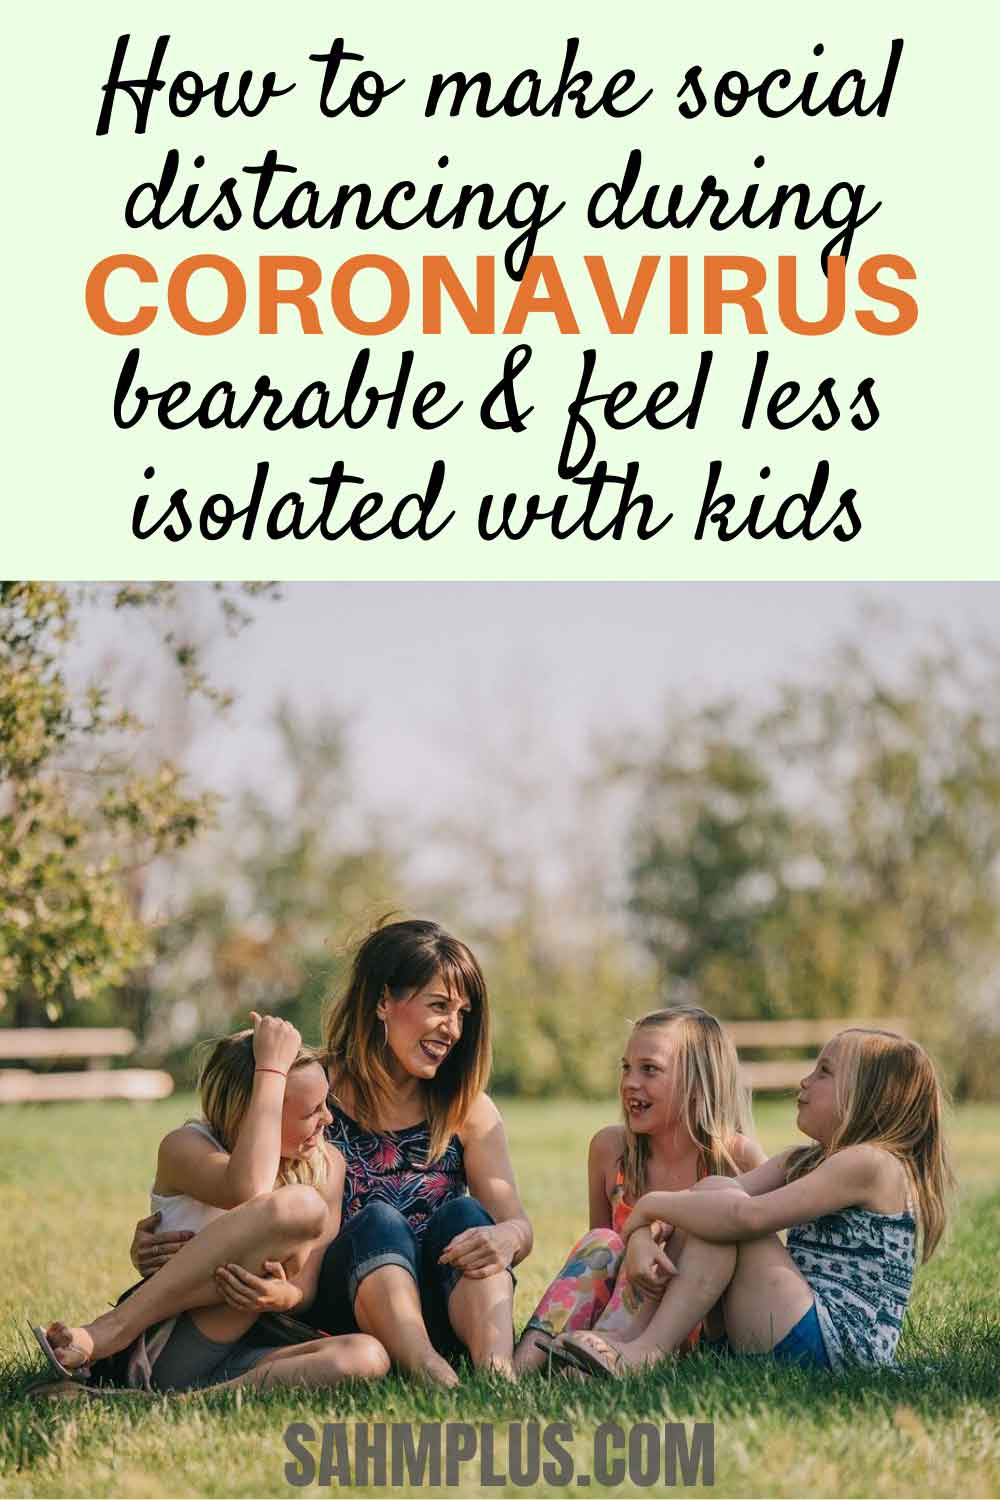 Social distancing and closures can feel isolating during the coronavirus outbreak.  These tips will help make your stay at home with kids more bearable as the world deals with the coronavirus pandemic.